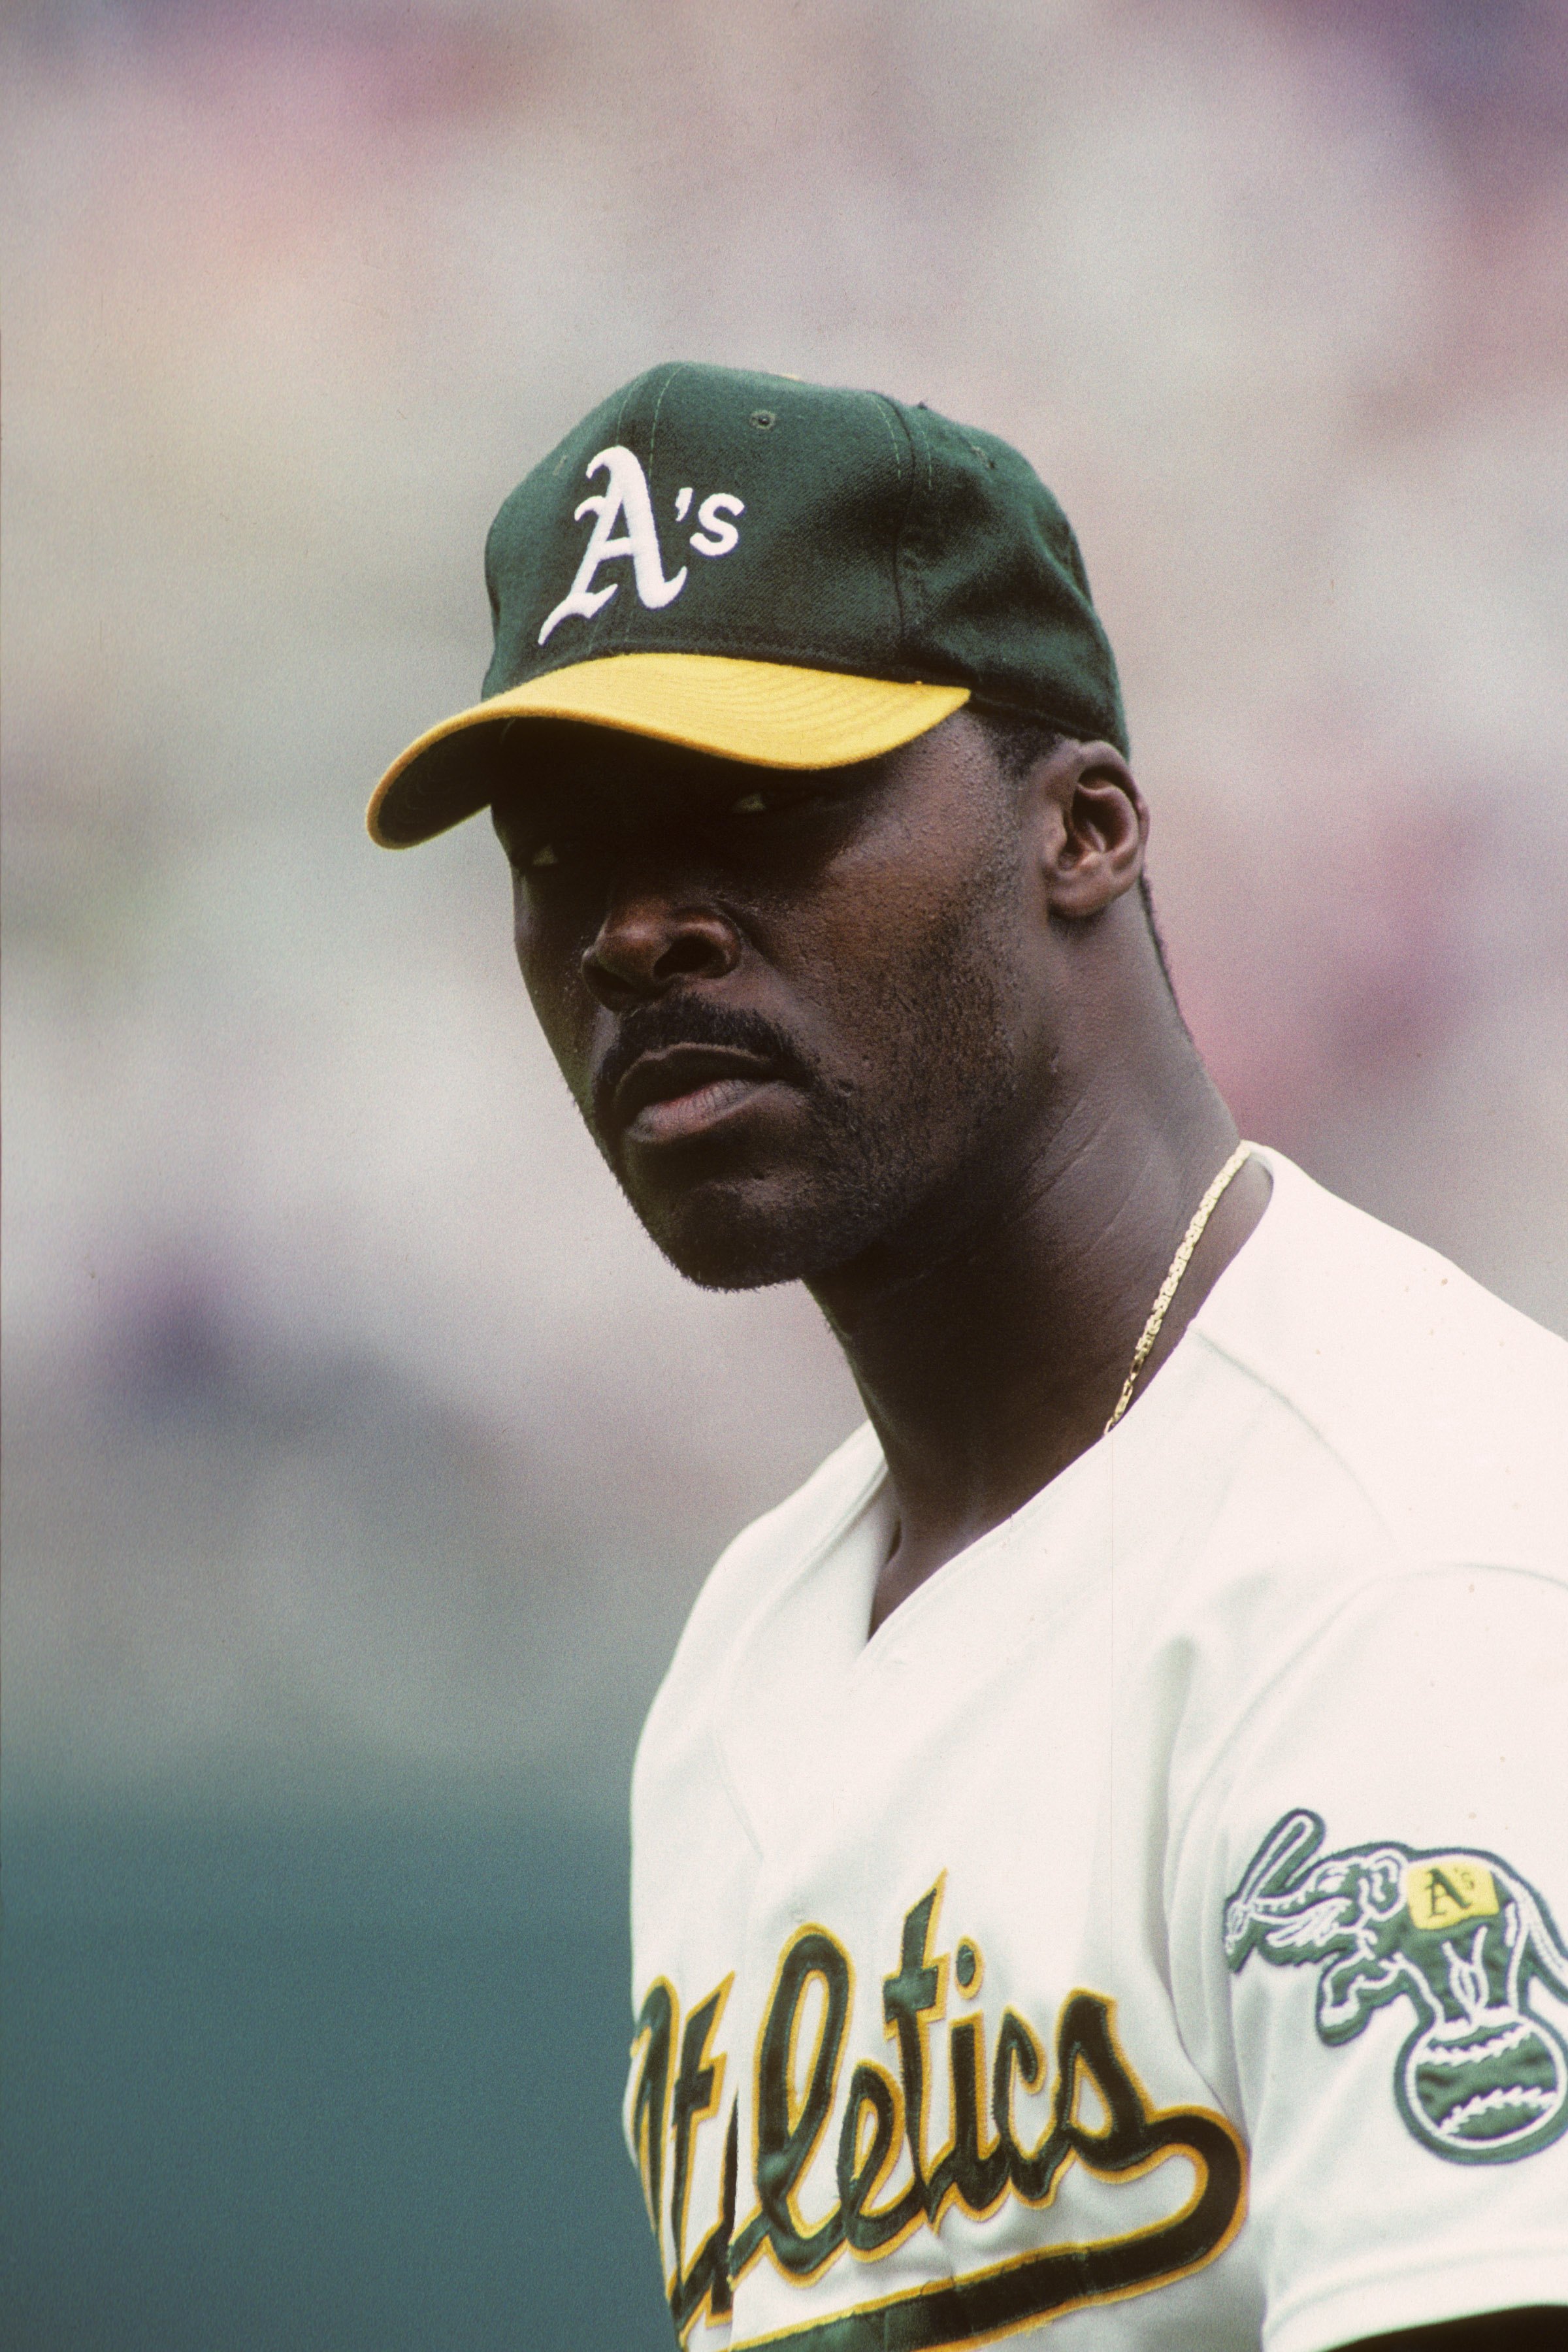 OAKLAND, CA - AUGUST 5:  Dave Stewart #34 of the Oakland Athletics looks on during an MLB game on August 5, 1991 at Oakland-Alameda County Coliseum in Oakland, California. (Photo by Otto Greule Jr./Getty Images)